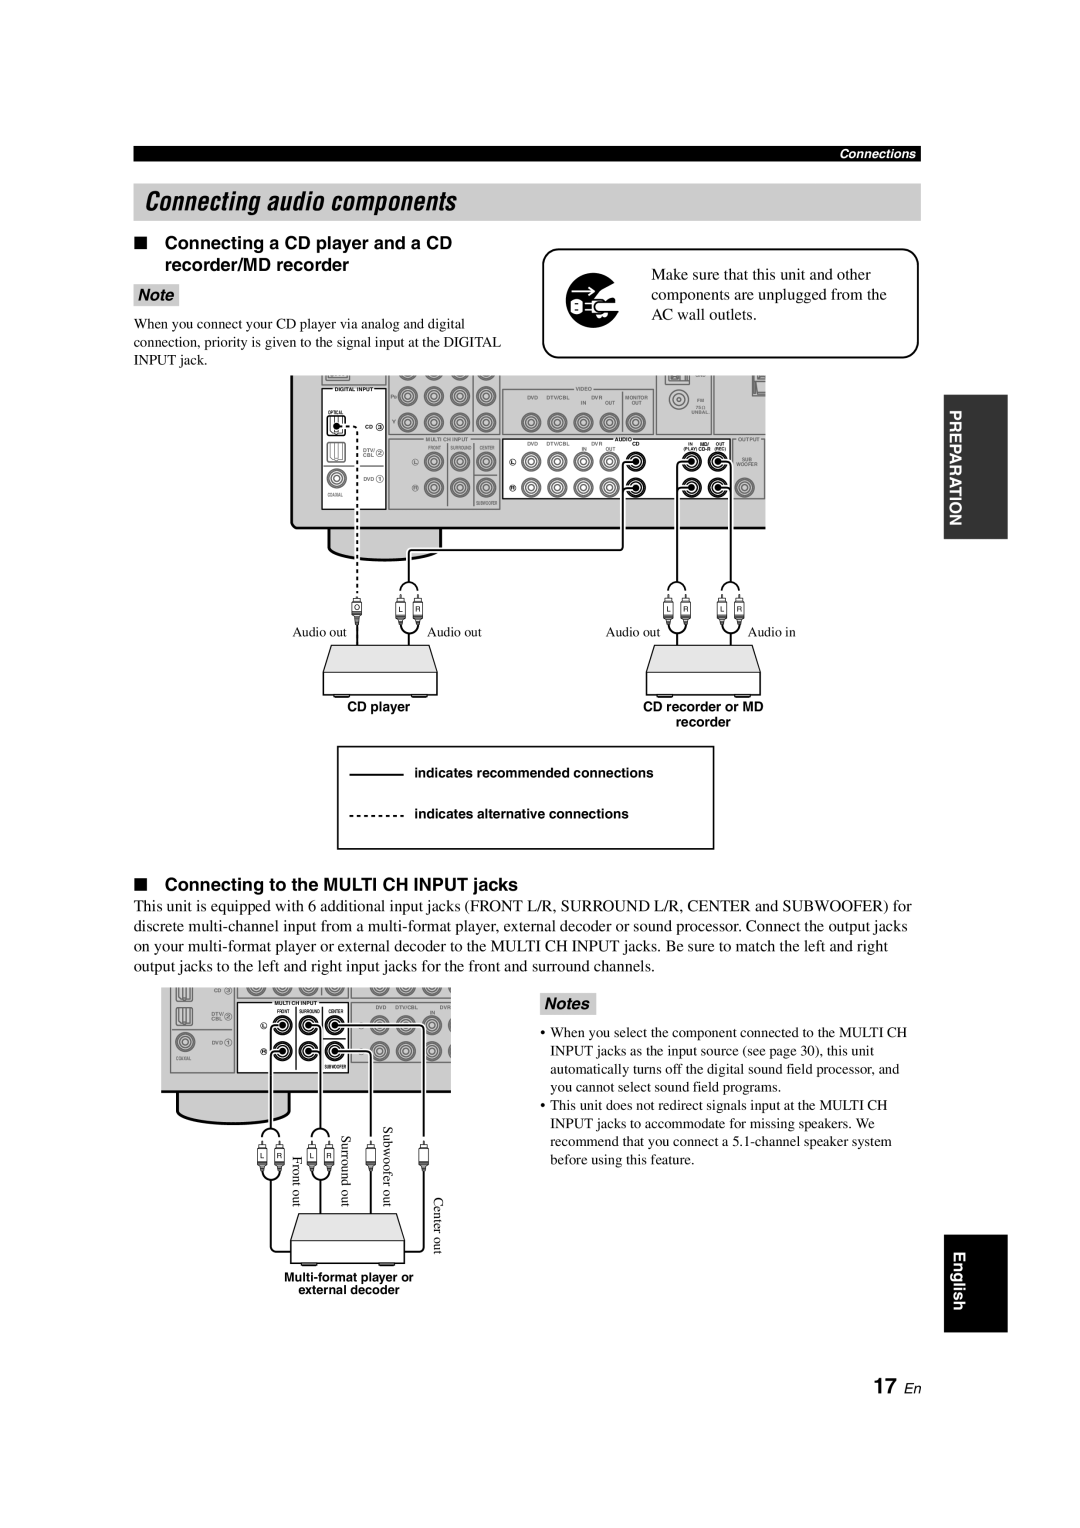 Yamaha HTR-6130 owner manual Connecting audio components, 17 En, Connecting to the MULTI CH INPUT jacks 